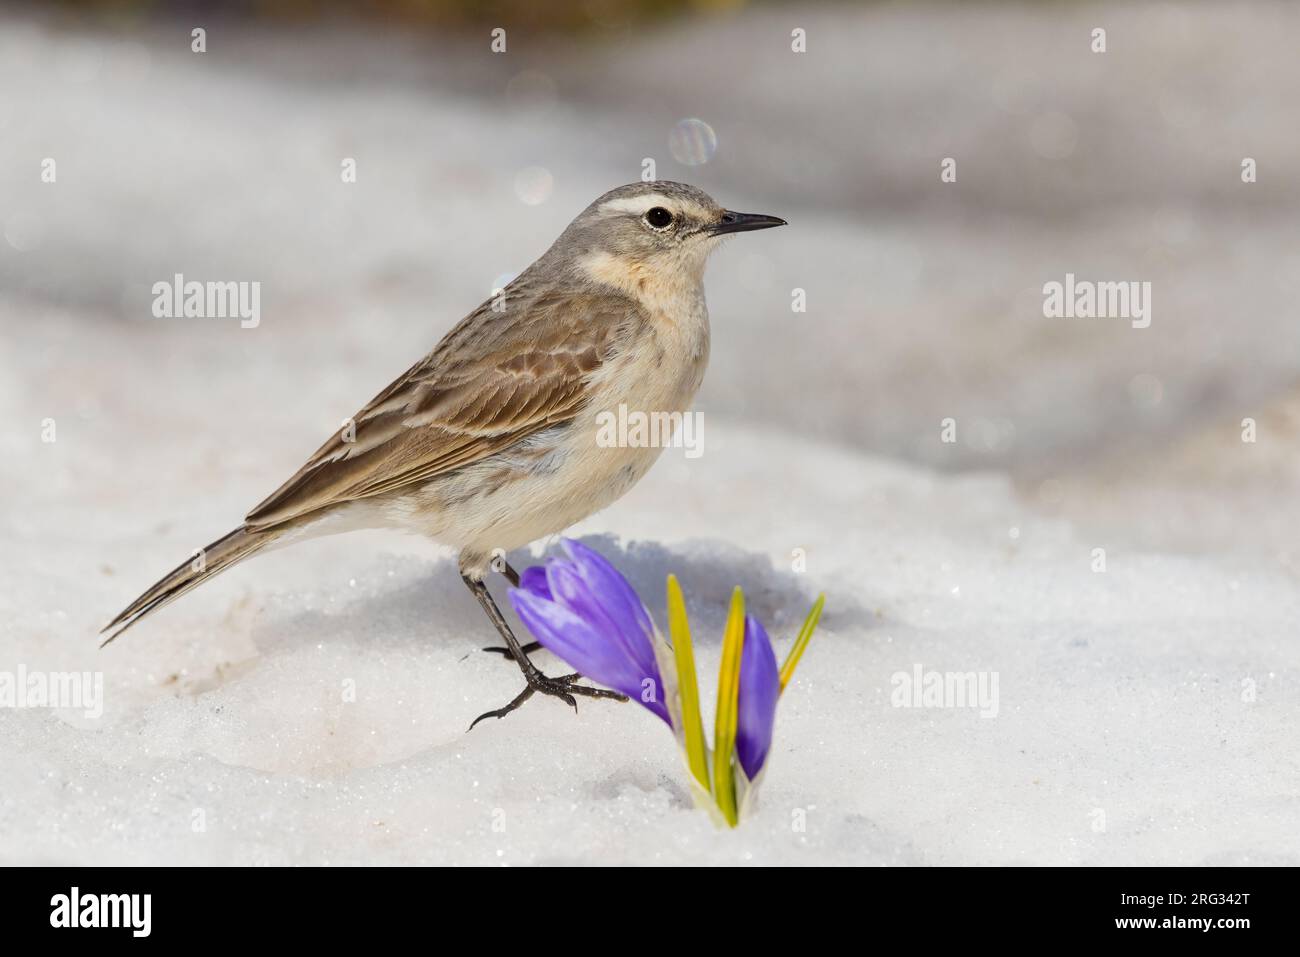 Water Pipit (Anthus spinoletta), side view of an adult standing on the snow close to a Crocus sp., Abruzzo, Italy Stock Photo